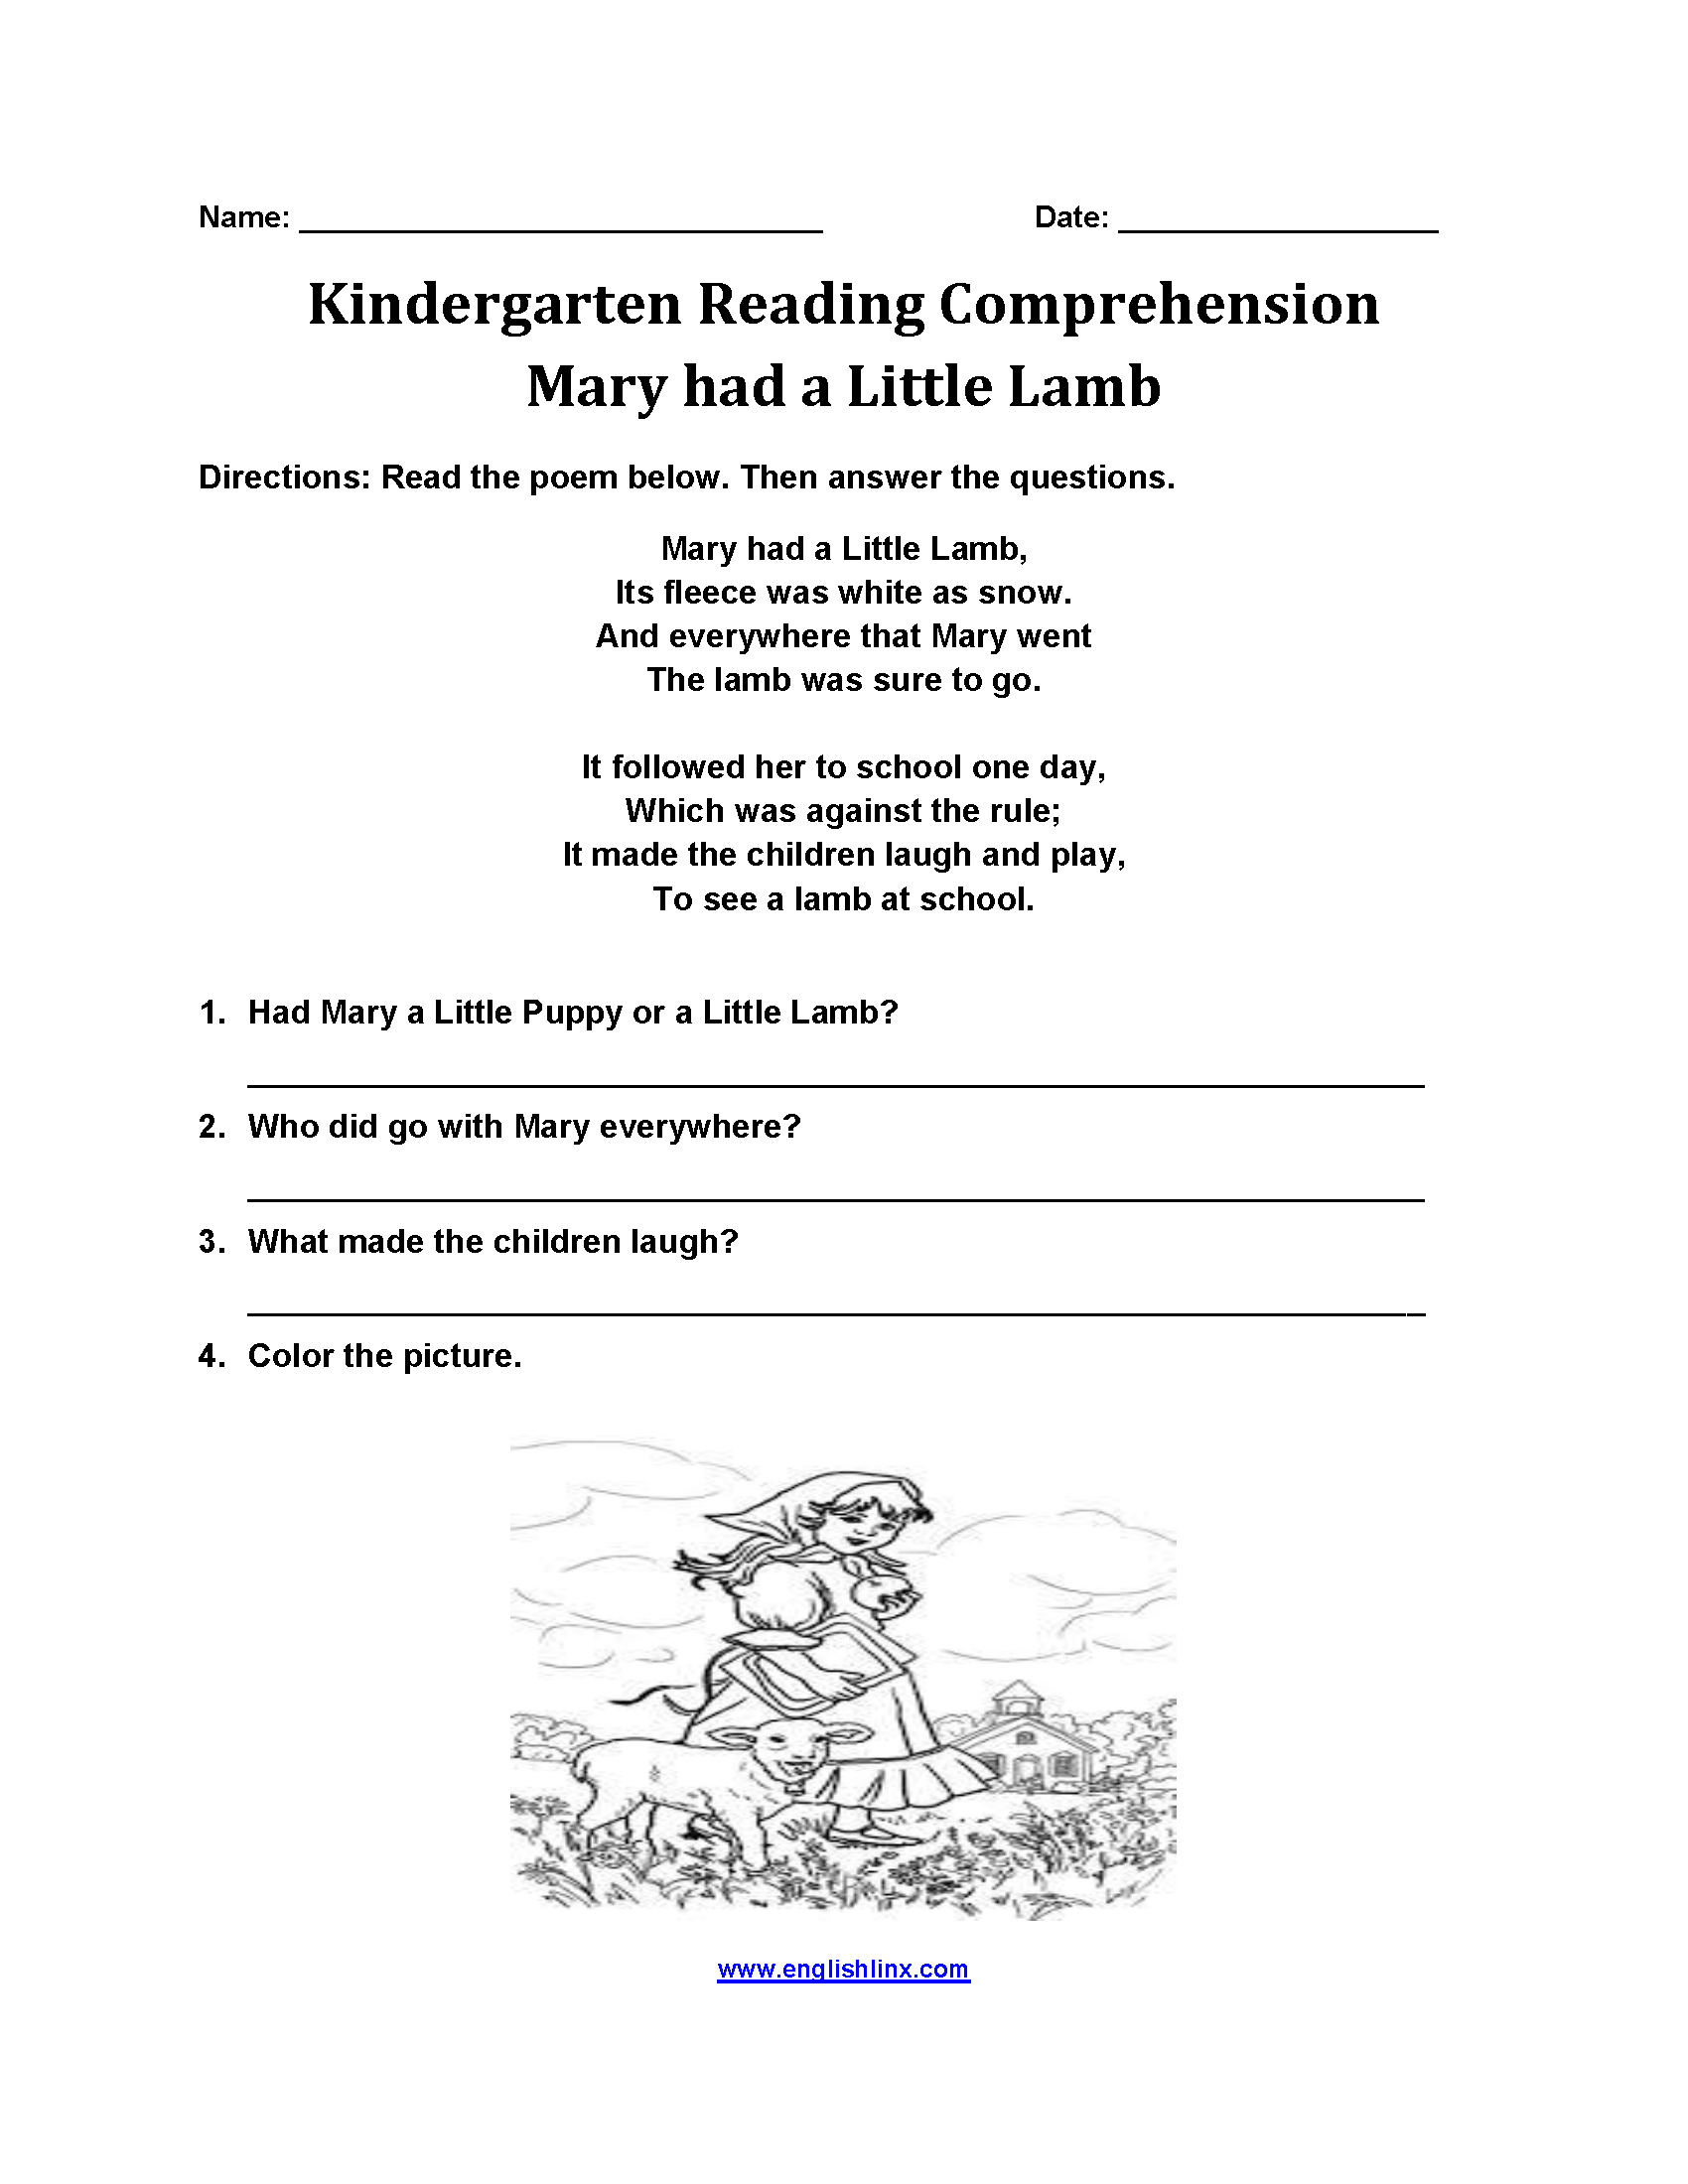 Mary Had a Little Lamb Kindergarten Reading Comprehension Worksheets